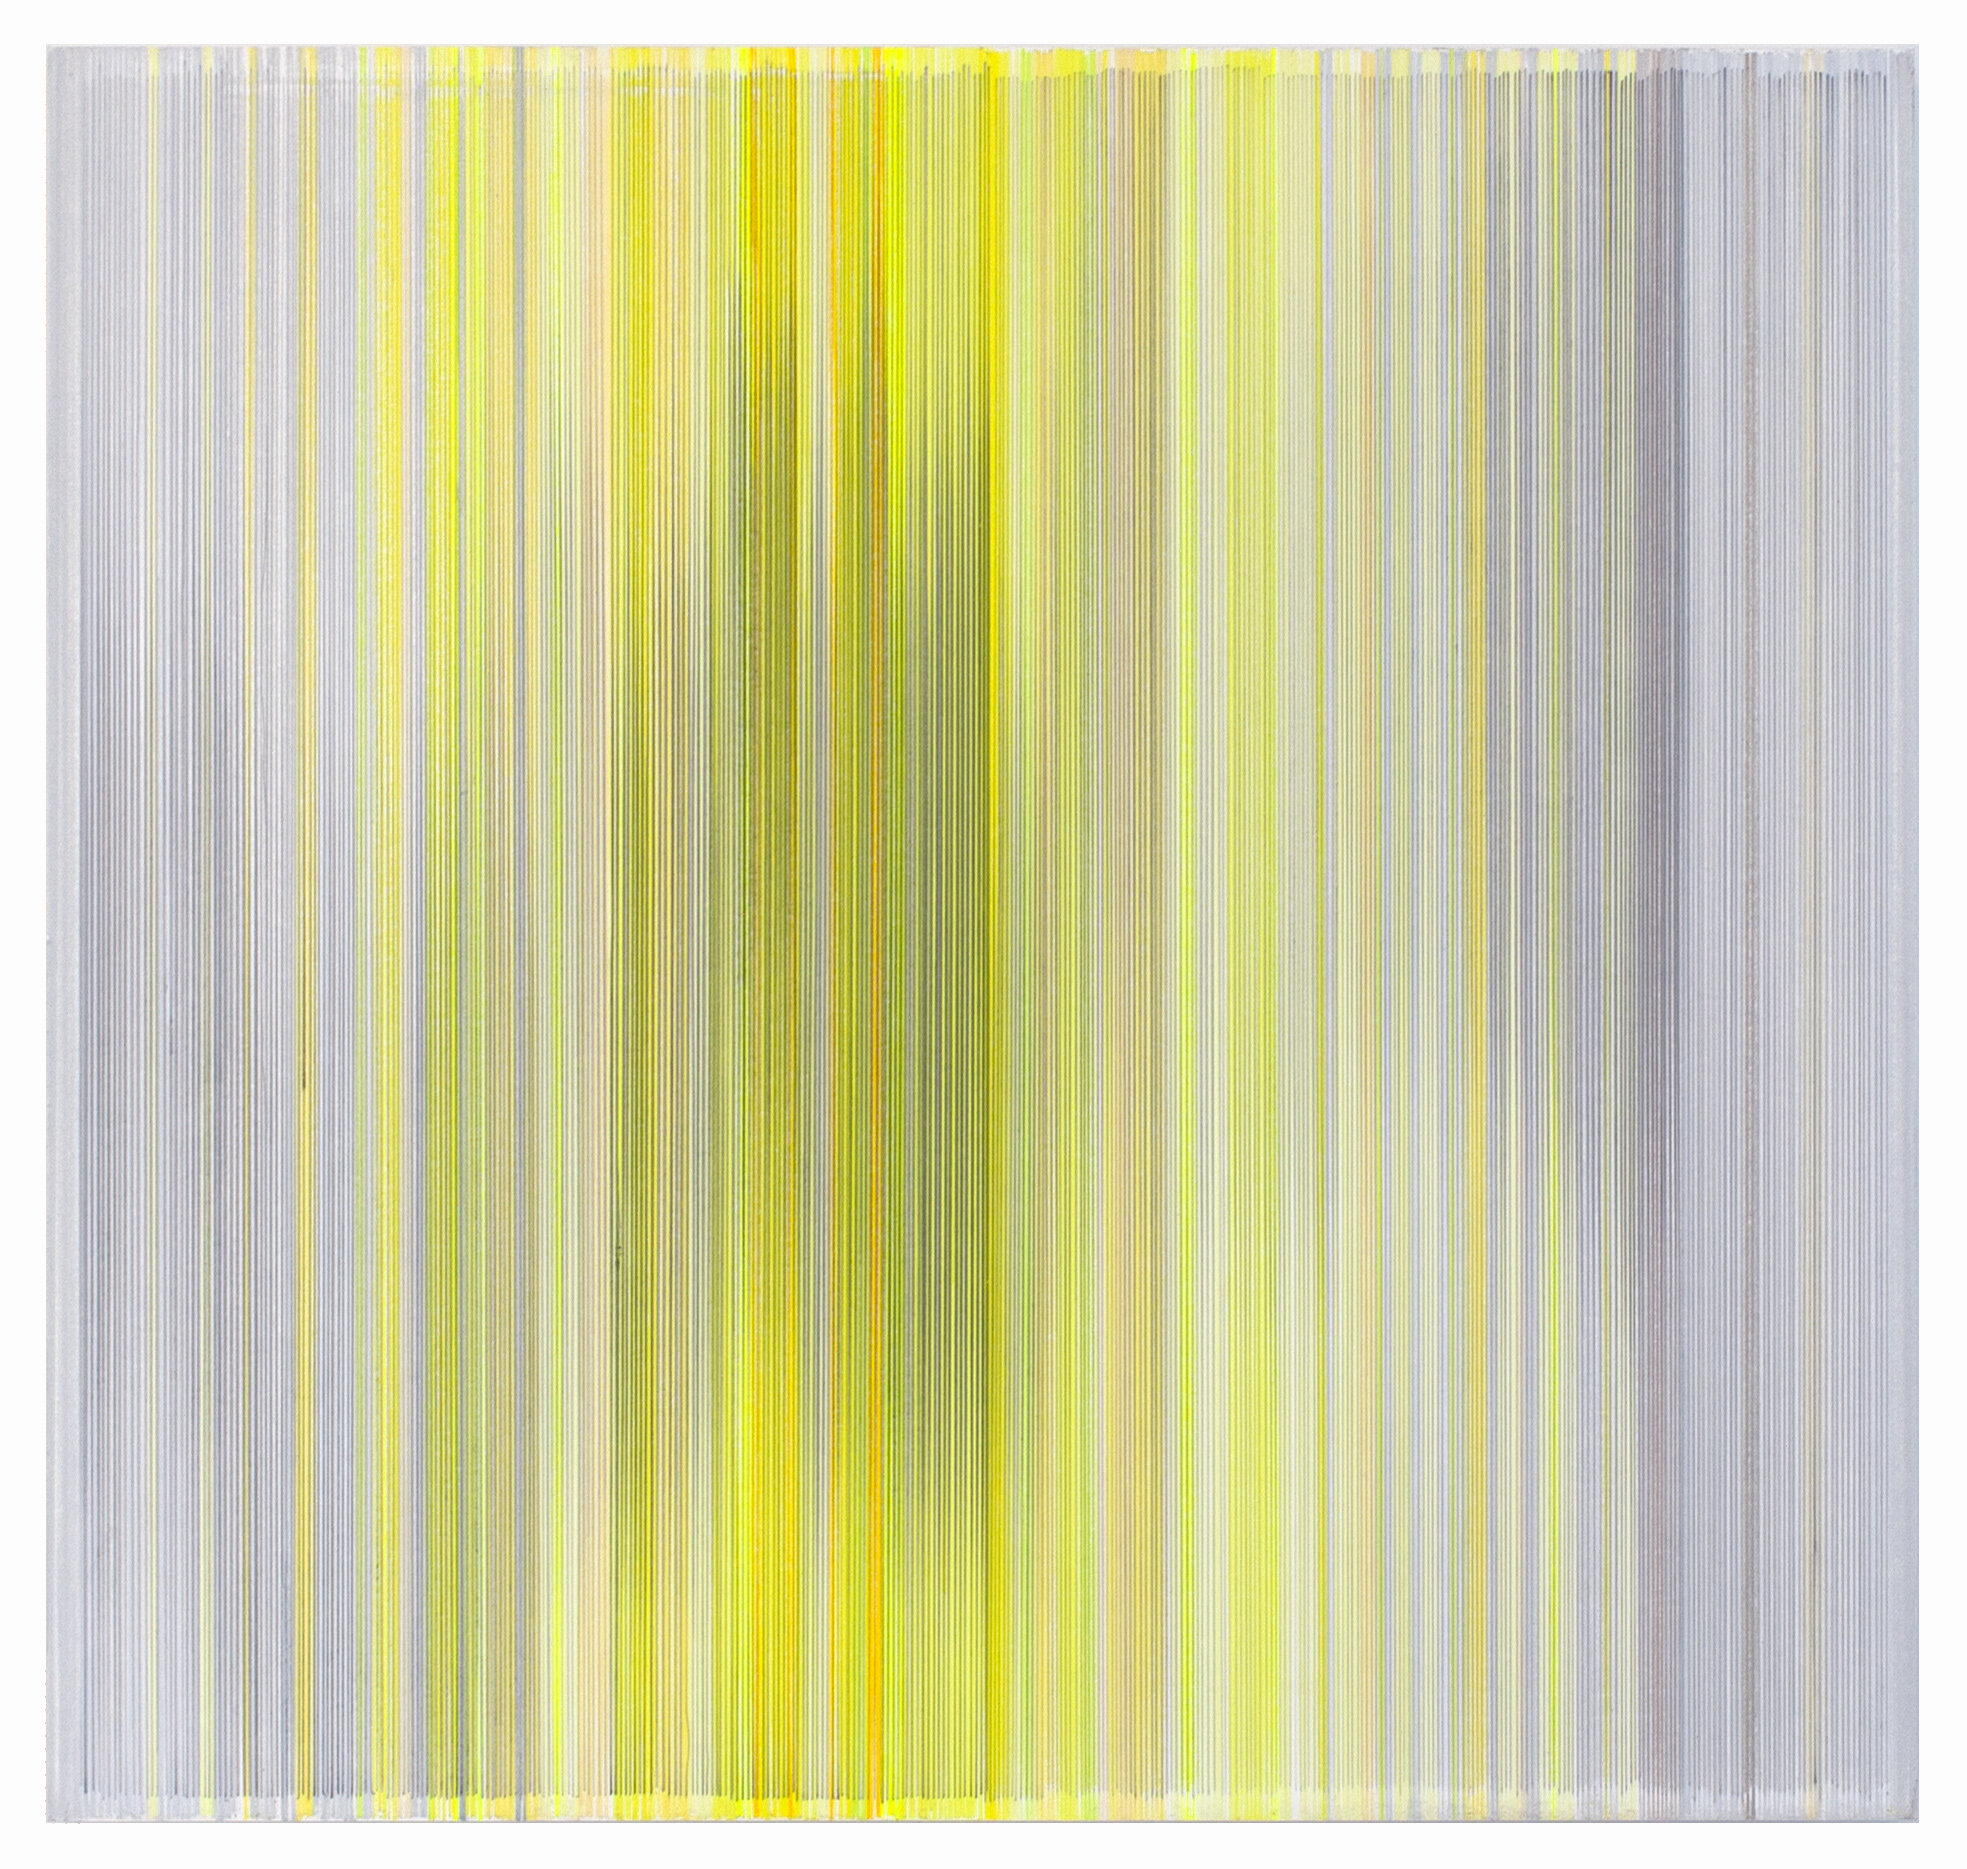    just this   2018 graphite and colored pencil on mat board 18 x 19 inches  exhibited in:  Spectrum , 2018   Thomas Cole National Historic Site, Catskill, NY curated by Kate Menconeri and Kiki Smith 